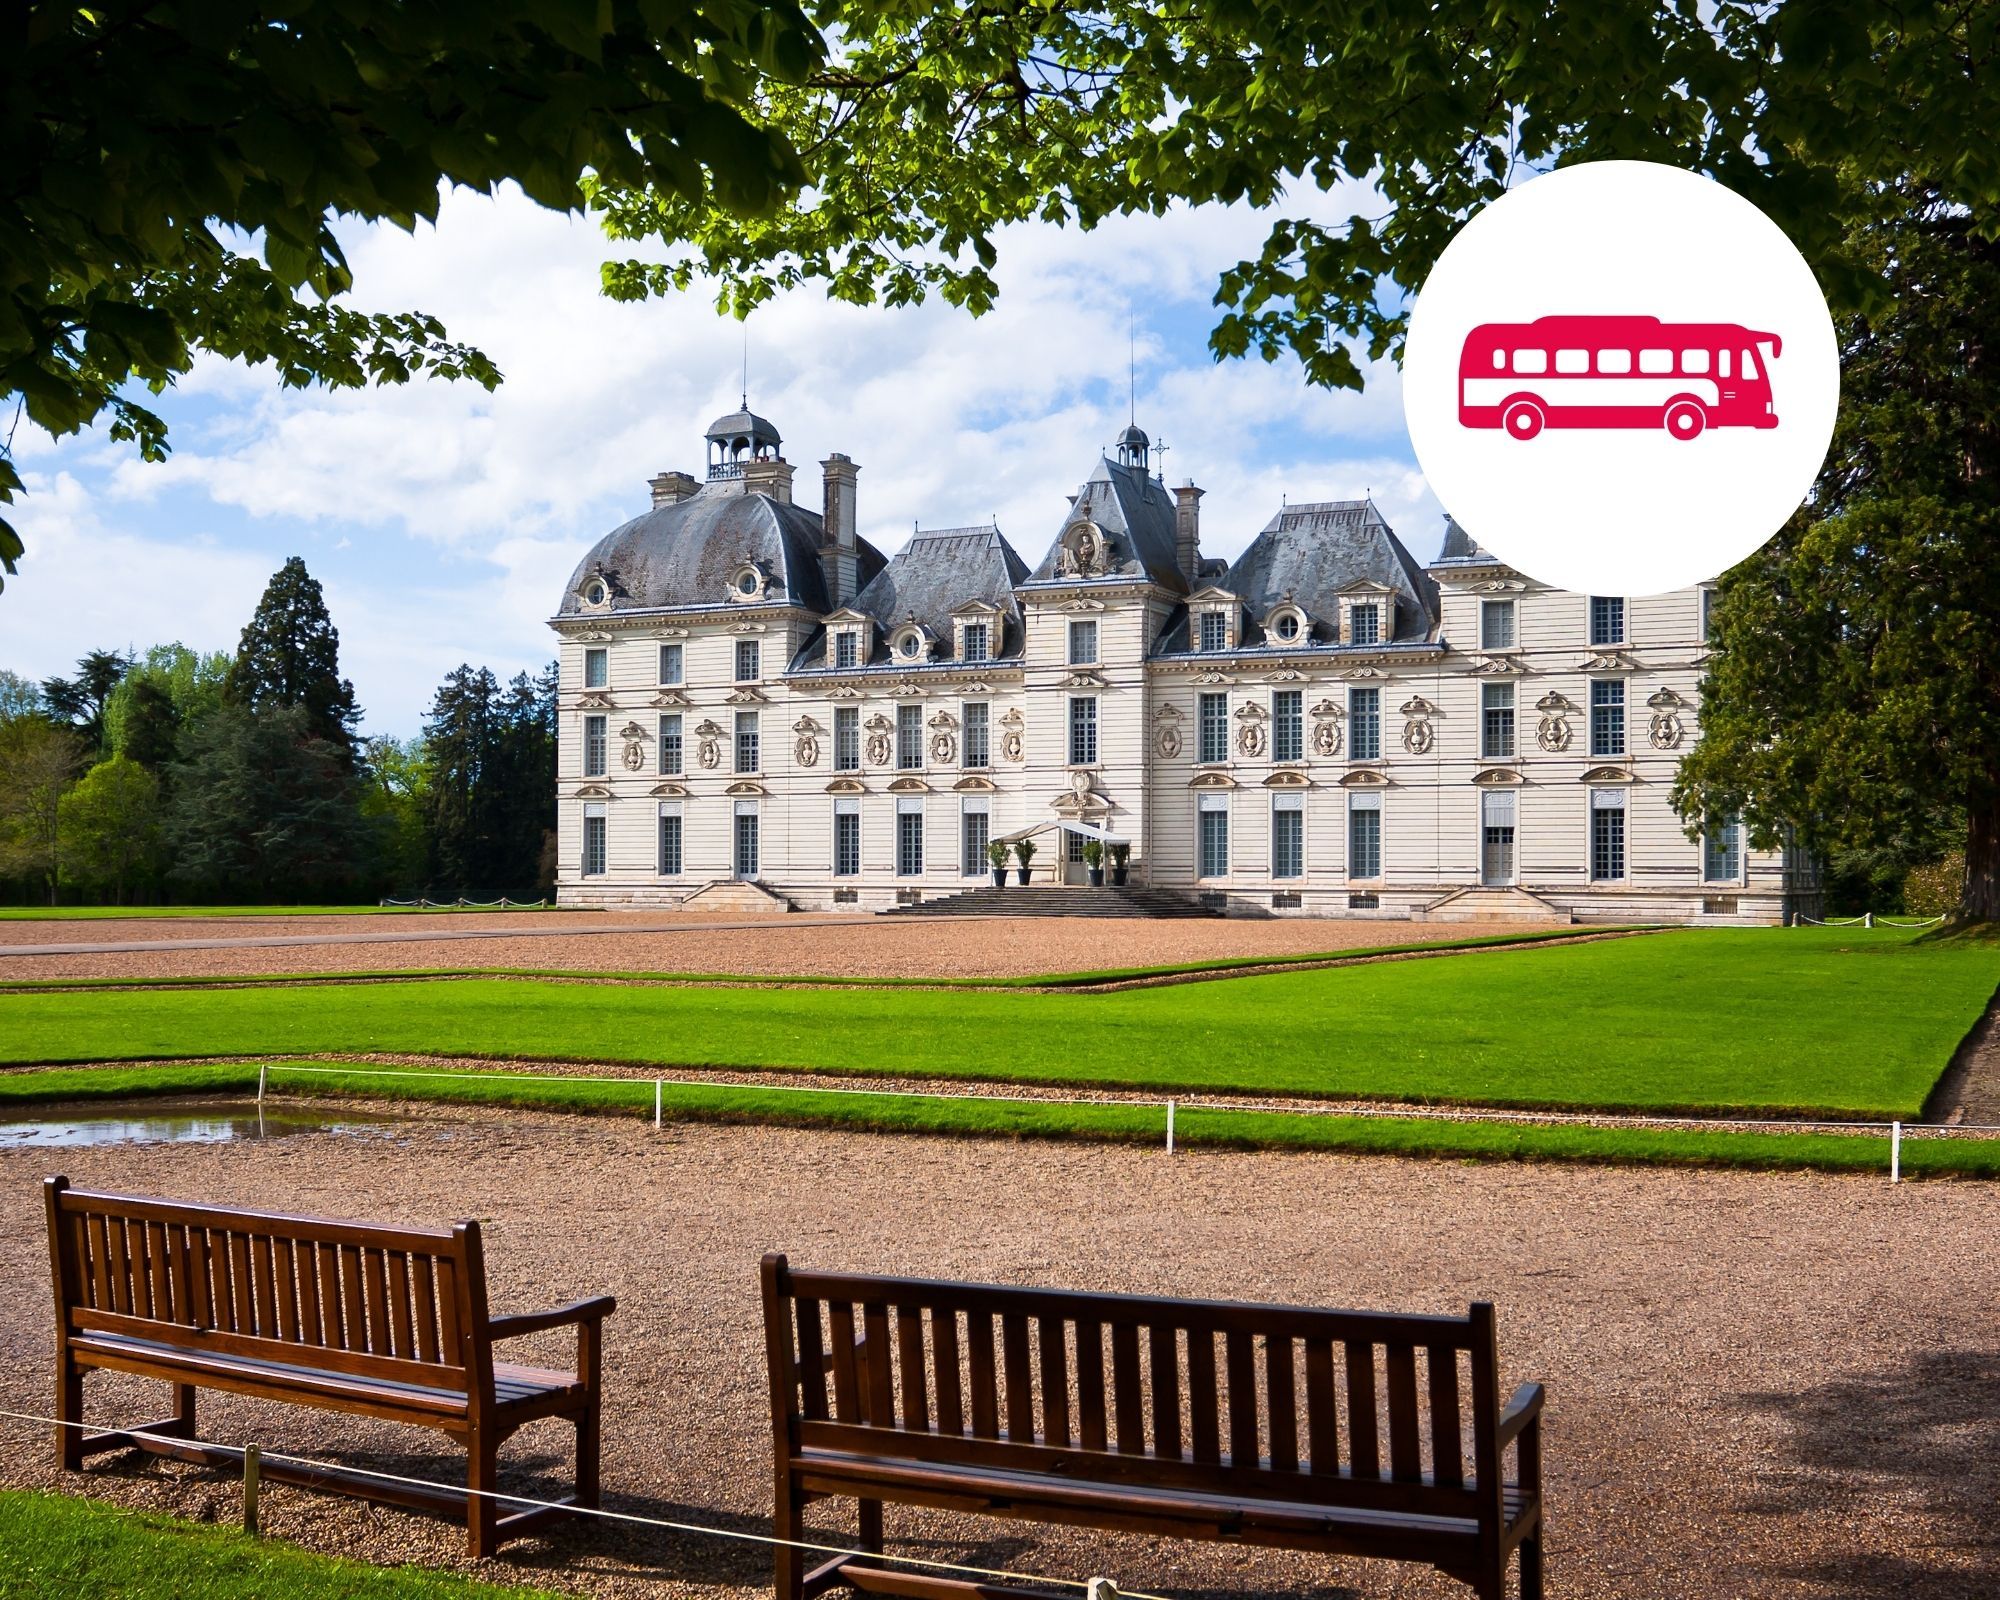 All day trip audioguided tour of Loire castles with transportation from Paris